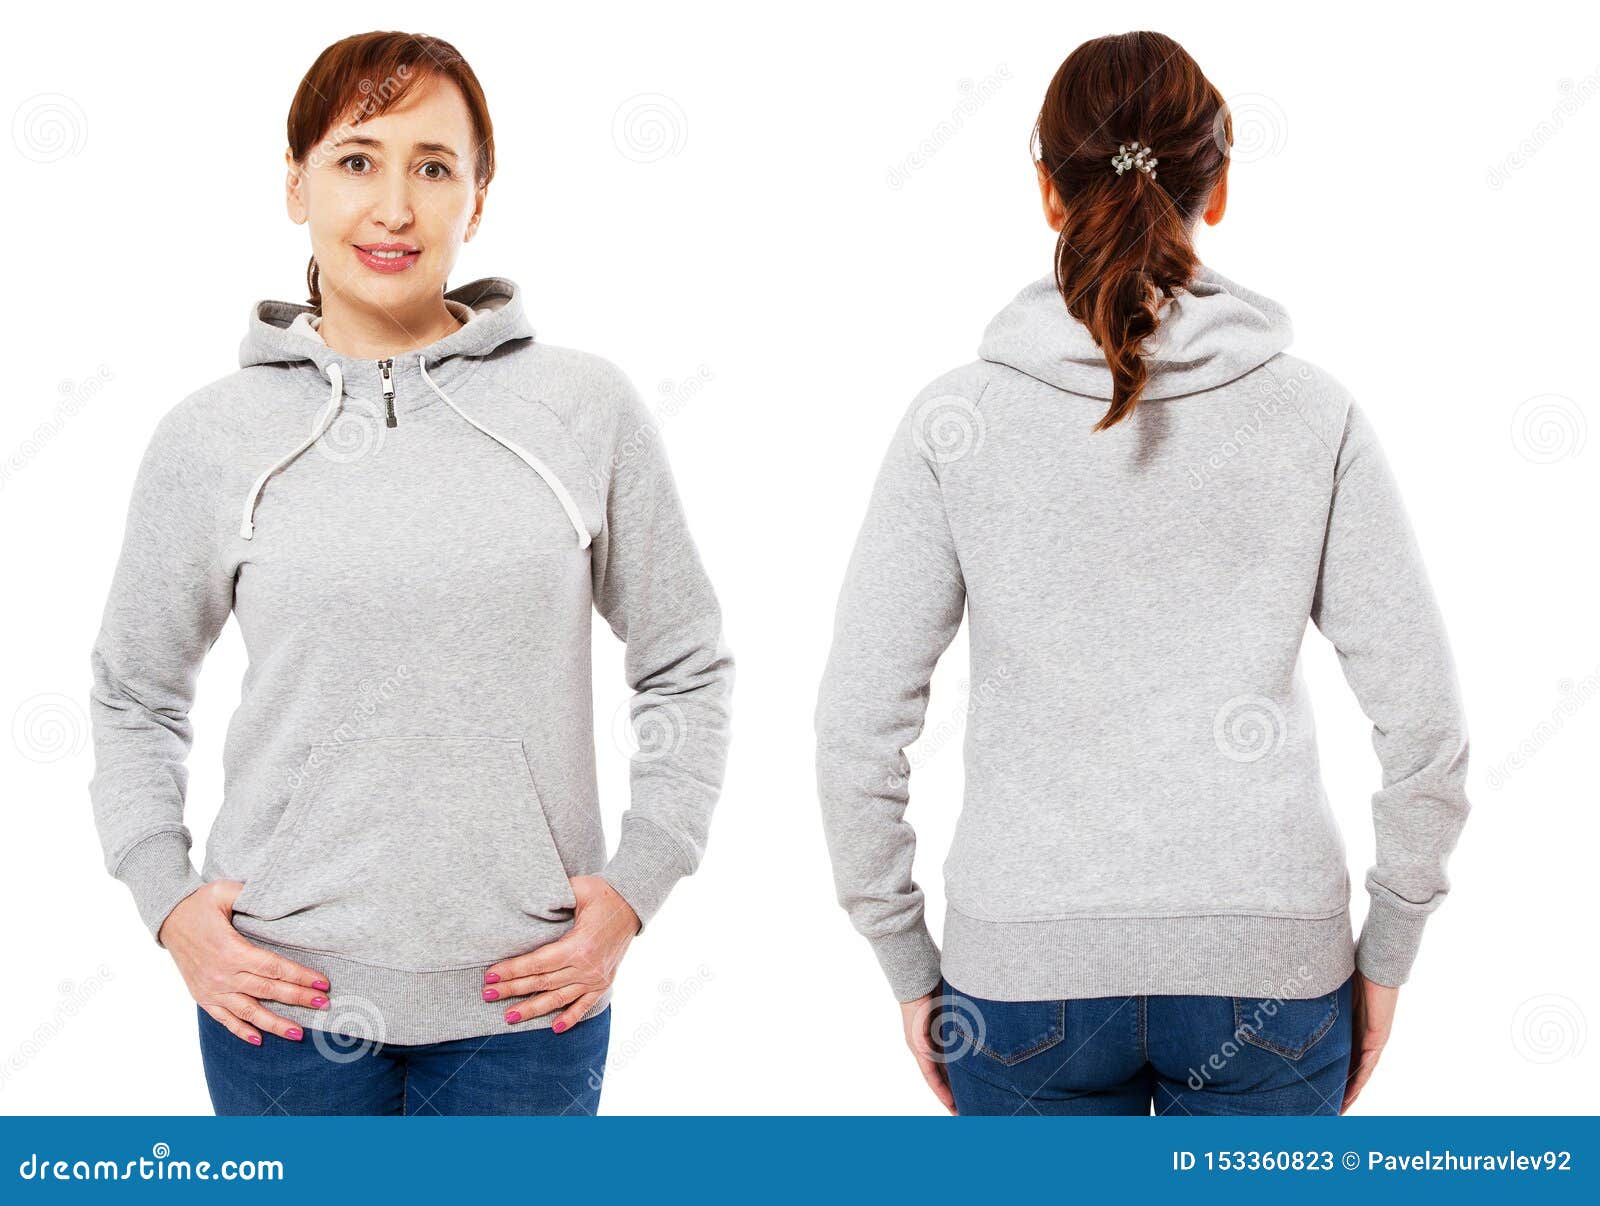 Beautiful Stylish Middle Age Woman In Hoodie Front And Back View White Woman In Sweatshirt Mockup Isolated On White Background Stock Image Image Of Front Jumper 153360823